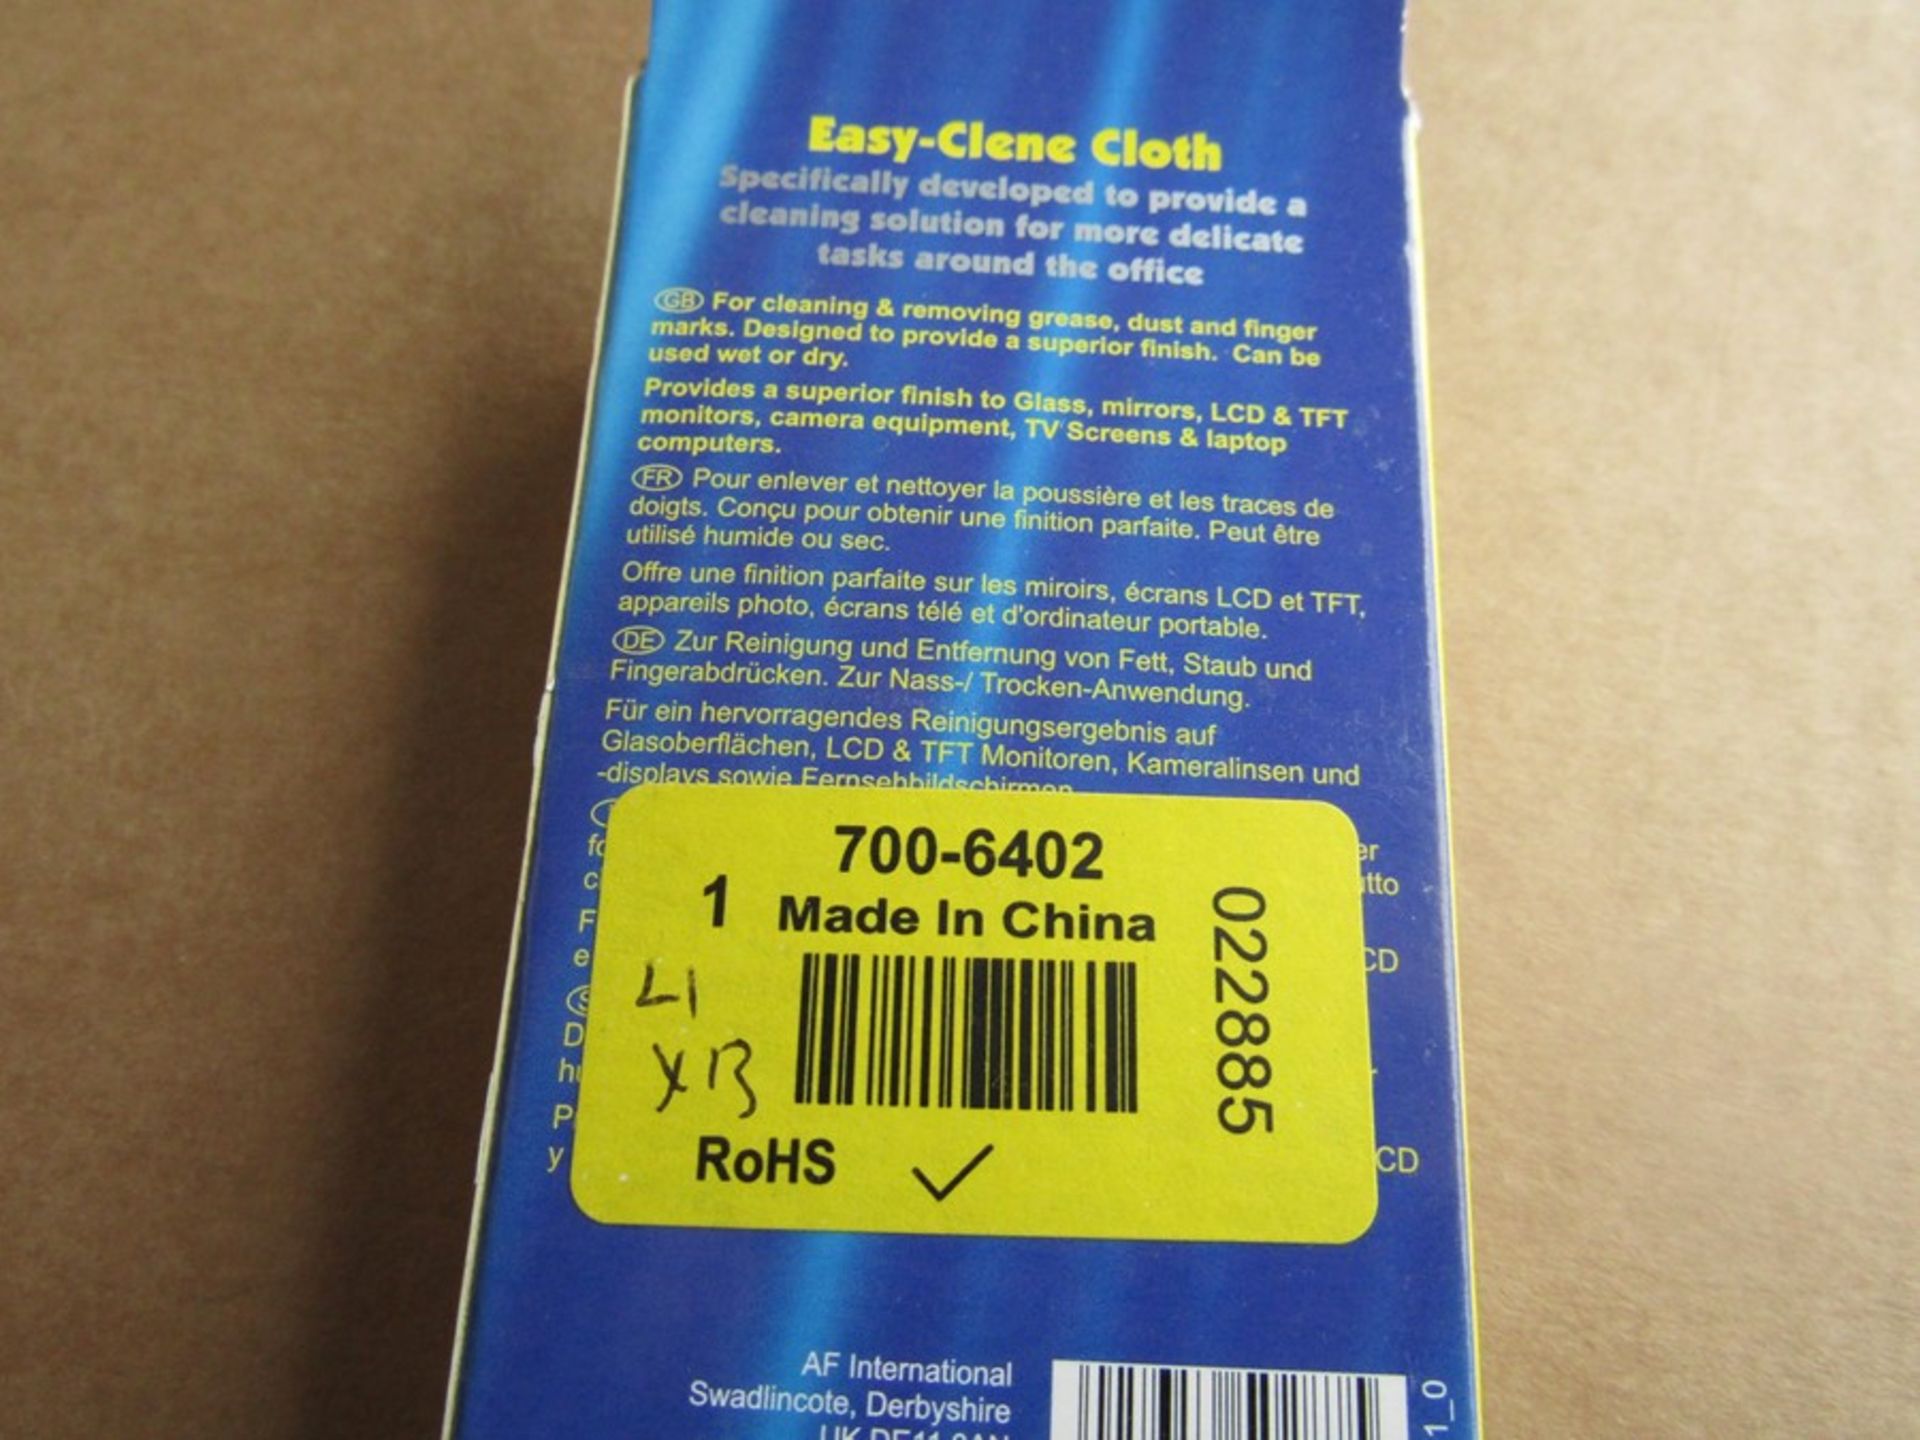 13 x AF Pack of 1 Blue Easy-Clene Multi-purpose Wipes for General Cleaning, Office Use - Image 3 of 3